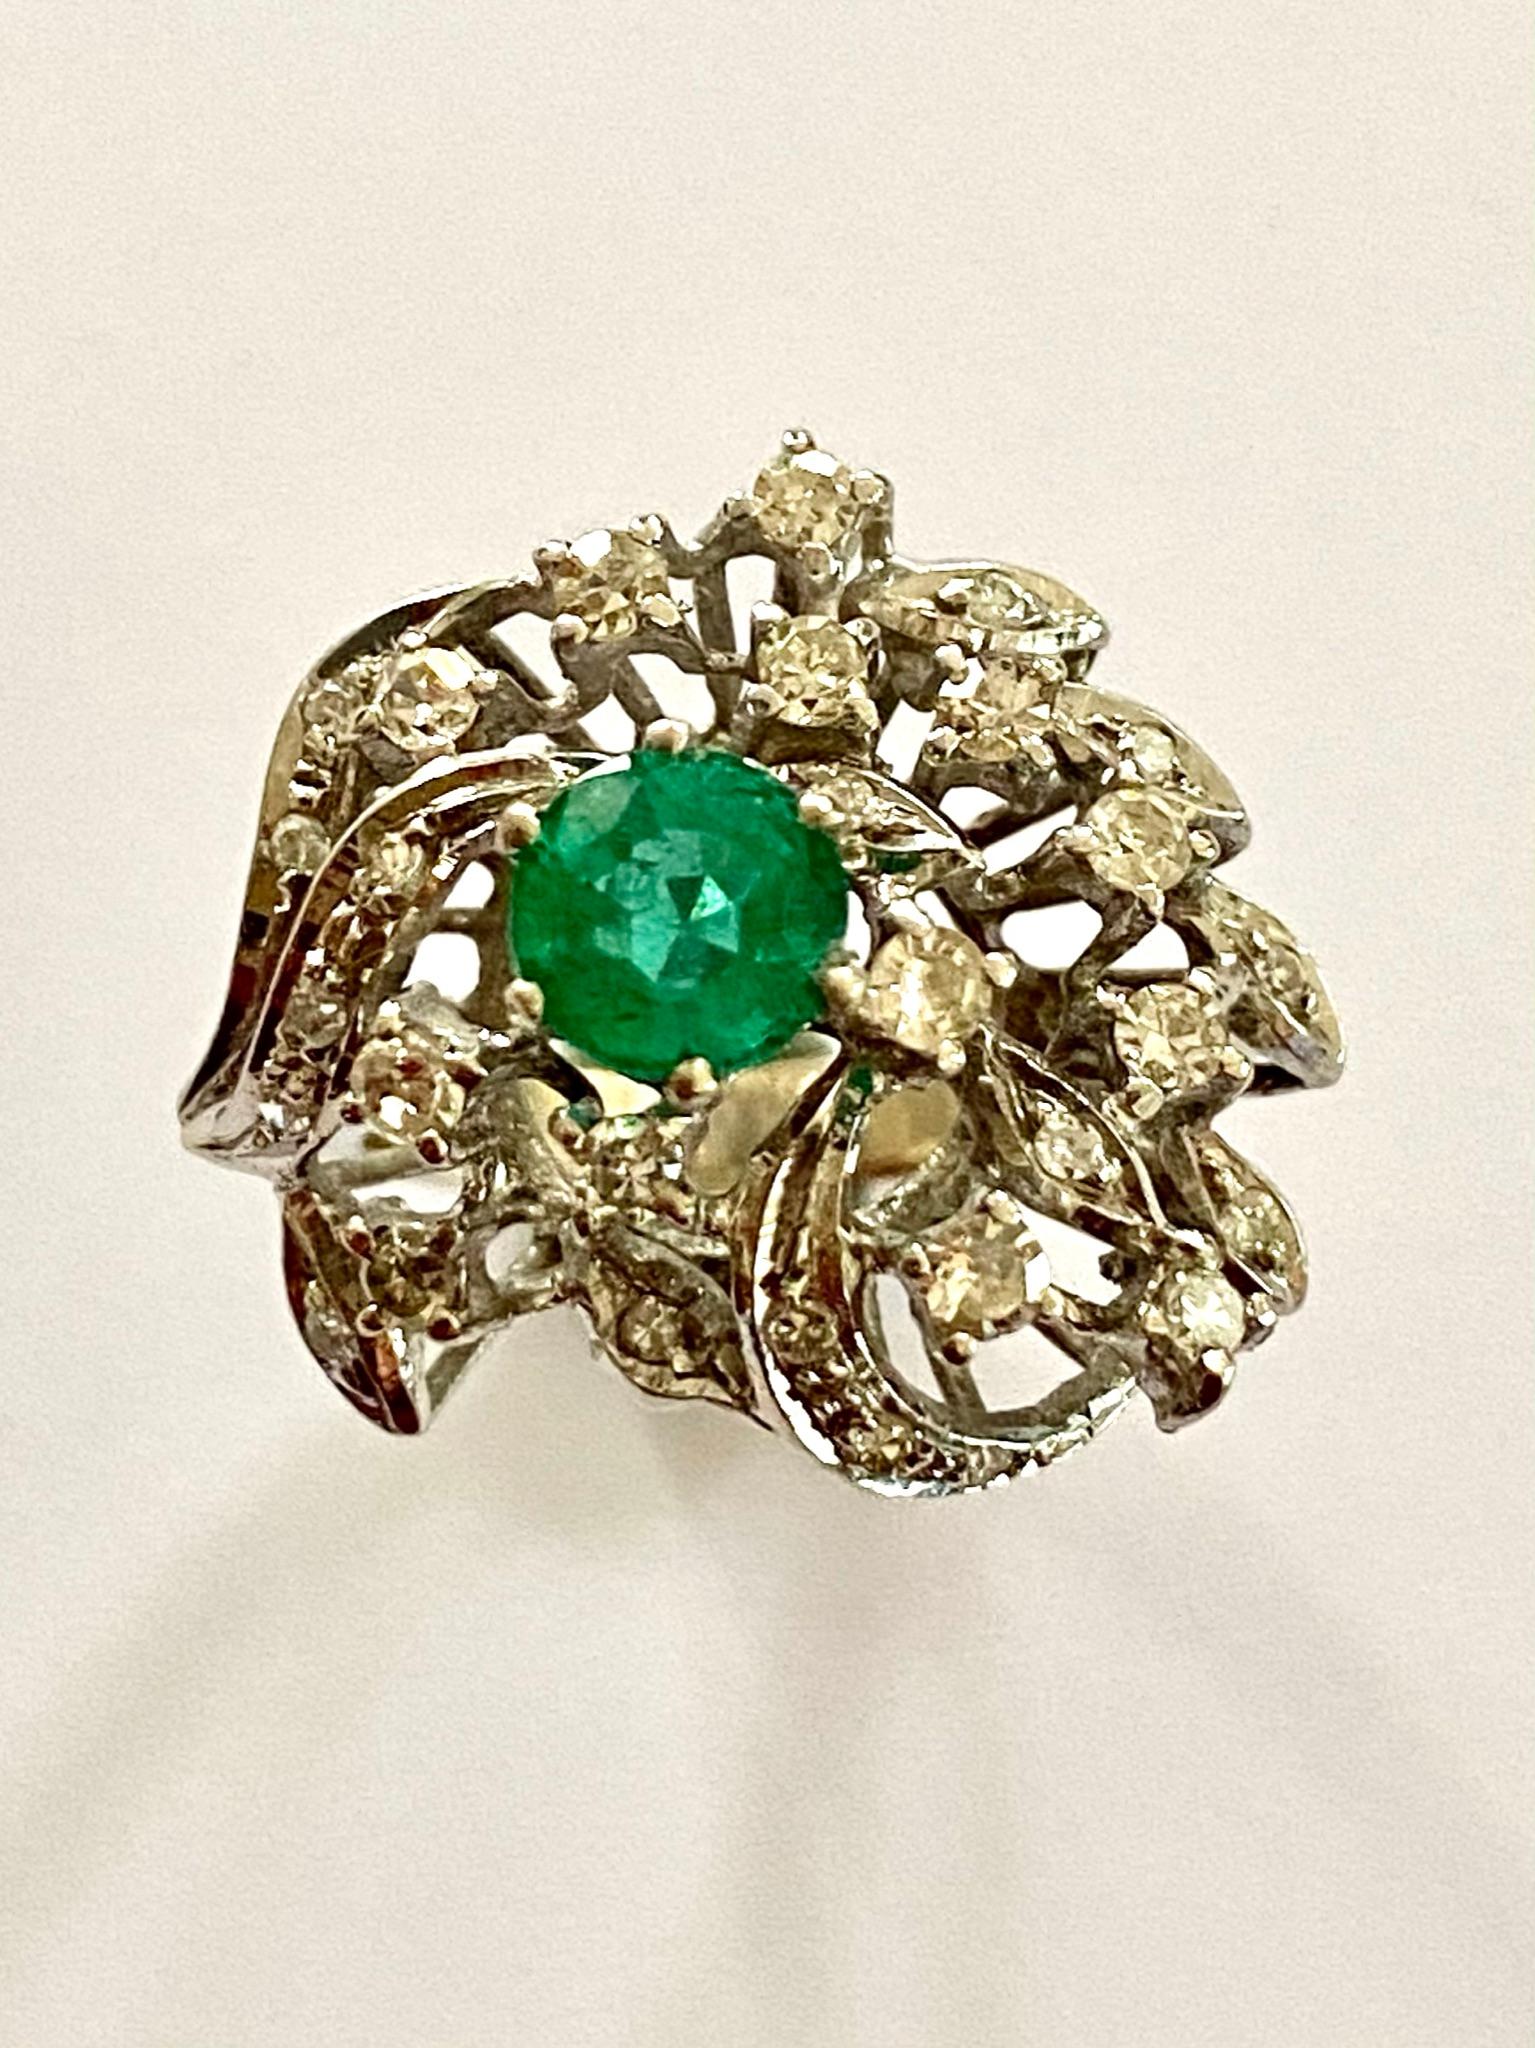 One (1) 18K. White Gold Ring, Stamped:  750 
One (10 Natural Beryl: Emerald = 0.85ct intense Green  Origin: Zambia
29 Diamonds single cut = 0.50 ct. VS/P1  IJK
Model: Fantasie Cocktail.
Made in Germany ca 1960
Weight: 6.74 grams
Size:  16,5 ( 52) 